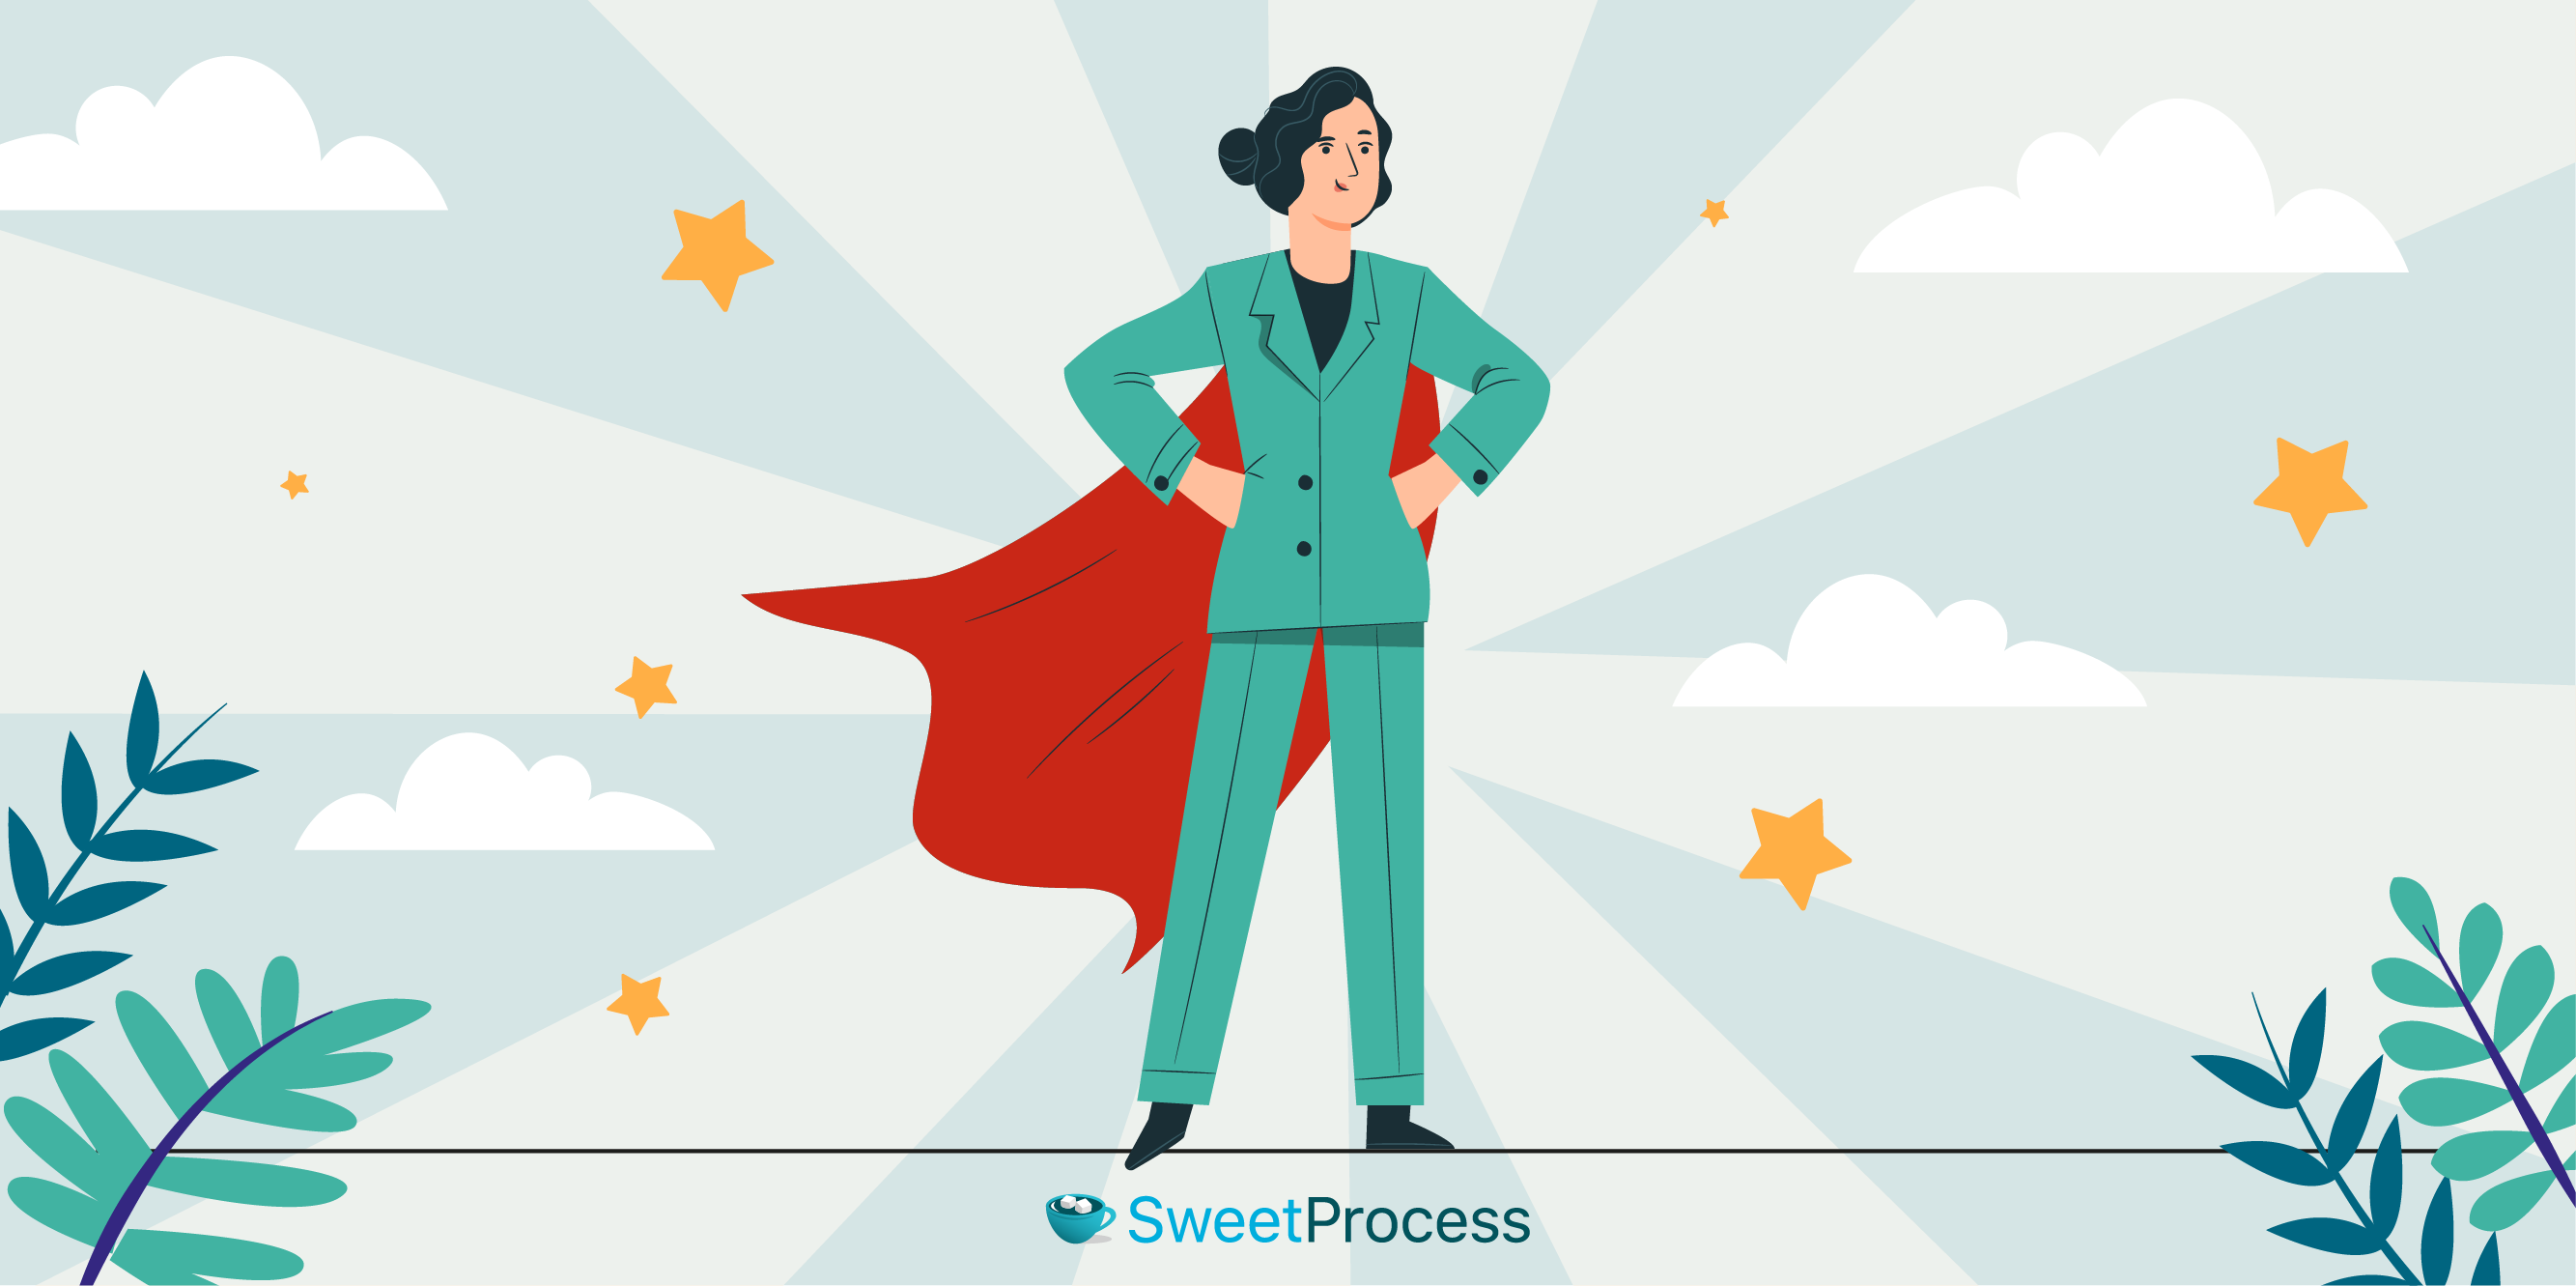 Empower Your Employees to Make the Right Business Decisions Using SweetProcess